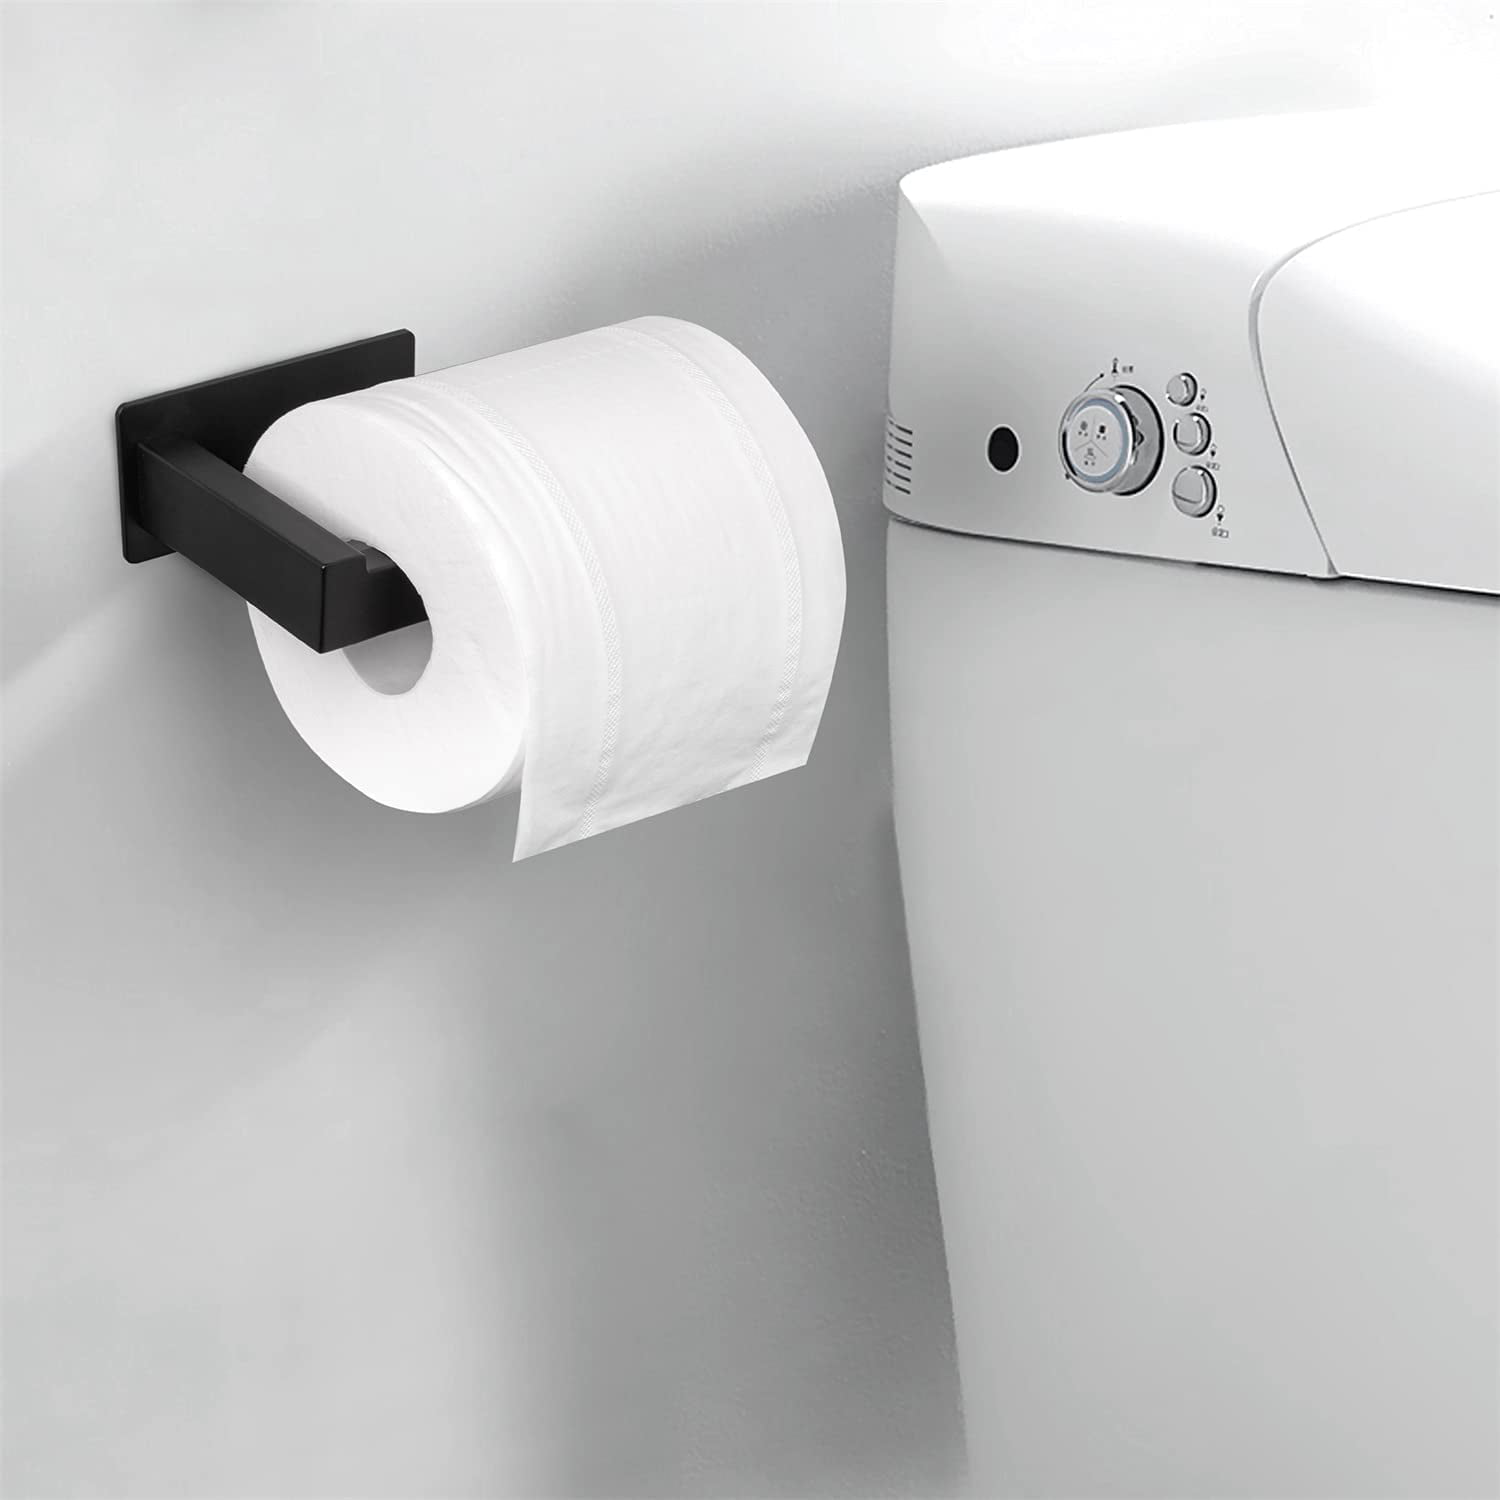 Simtive Adhesive Toilet Paper Holder, No Drilling Stainless Steel